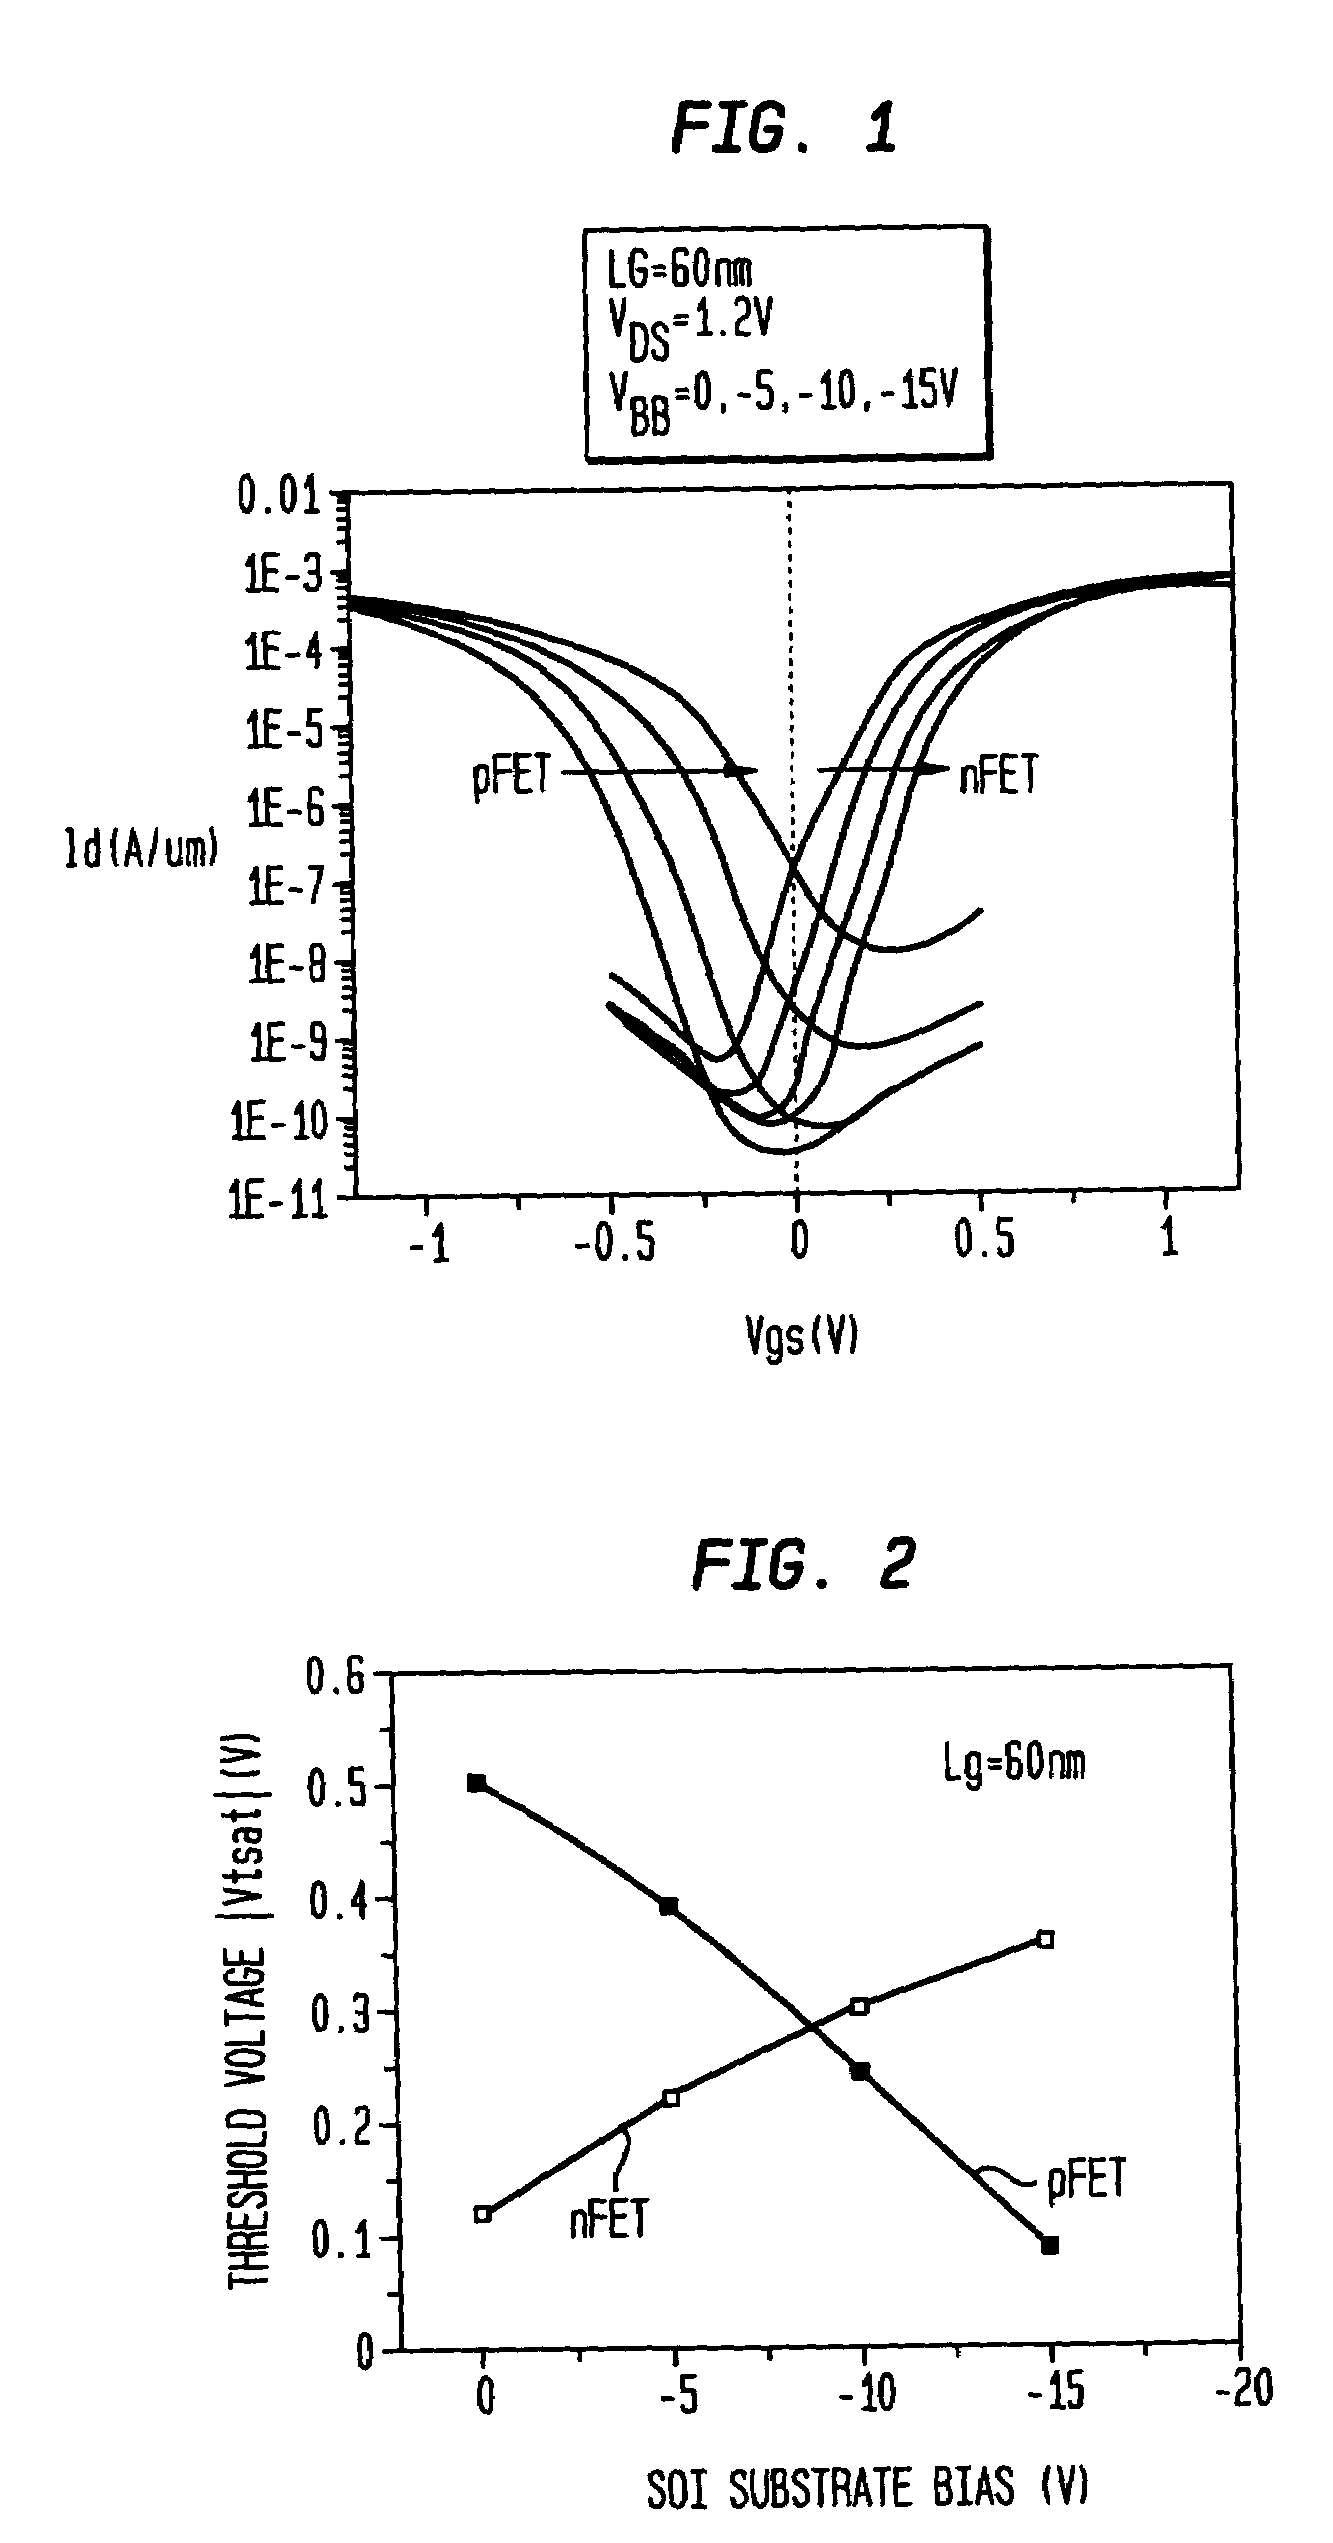 Methods of applying substrate bias to SOI CMOS circuits